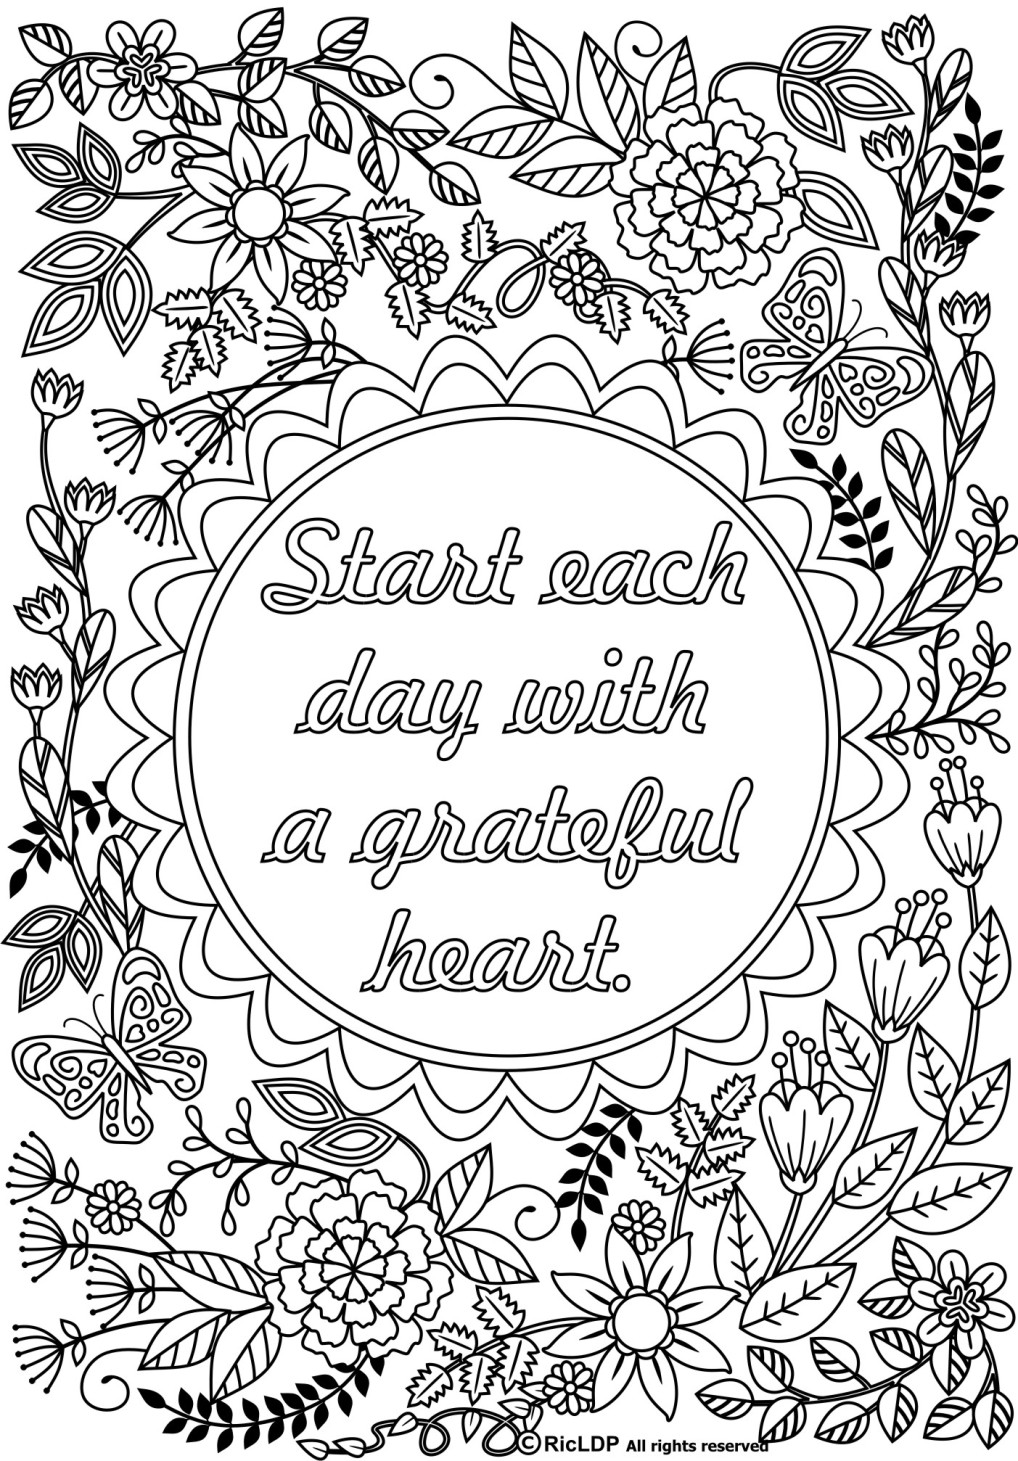 Quotes Coloring Pages For Adults
 Start Each Day with a Grateful Heart Adult Coloring